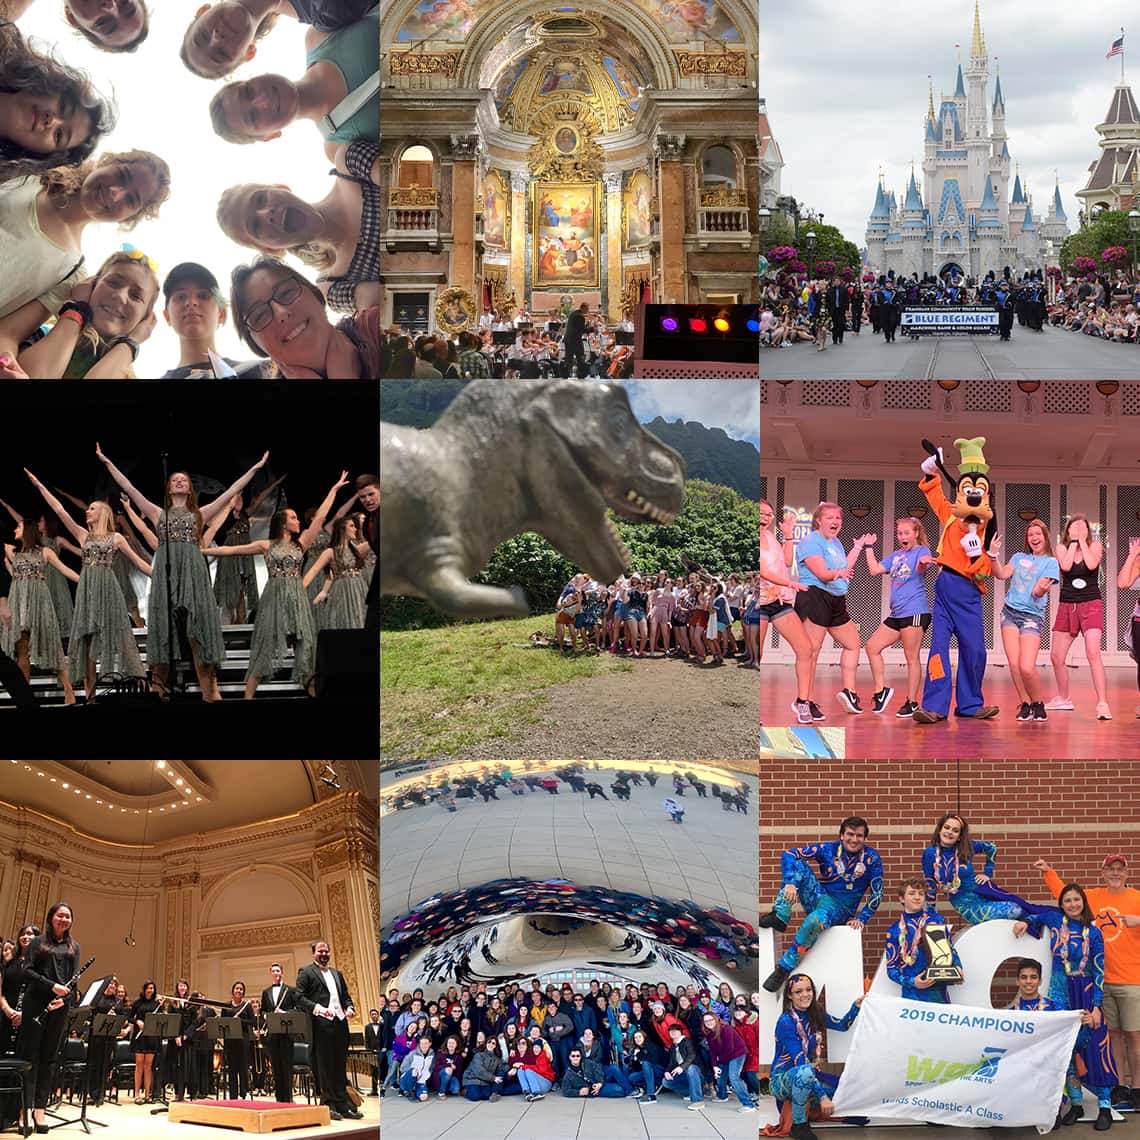 Help document the memories for your community as a Music Travel Consultants trip journalist.